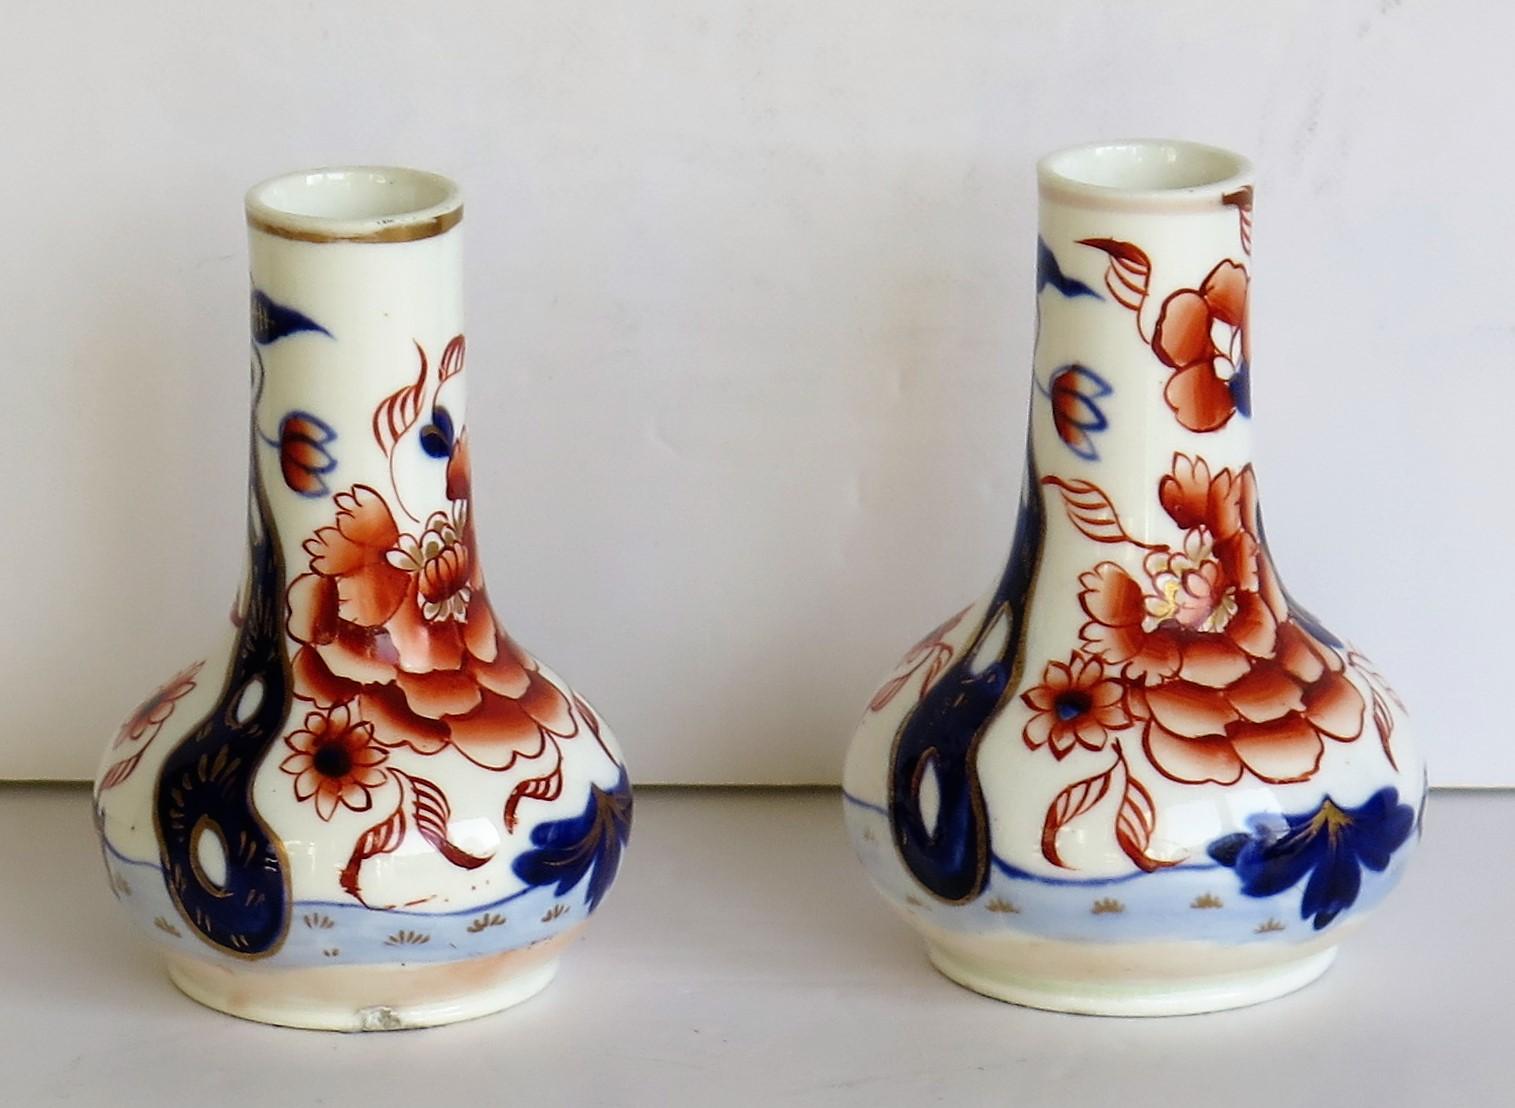 These are a beautiful pair of small vases or scent bottles made in porcelain by Mason's (C J Mason) of Lane Delph, Staffordshire Potteries, England.

They are hand decorated in the Fence Japan pattern which is a well known Mason's pattern as shown